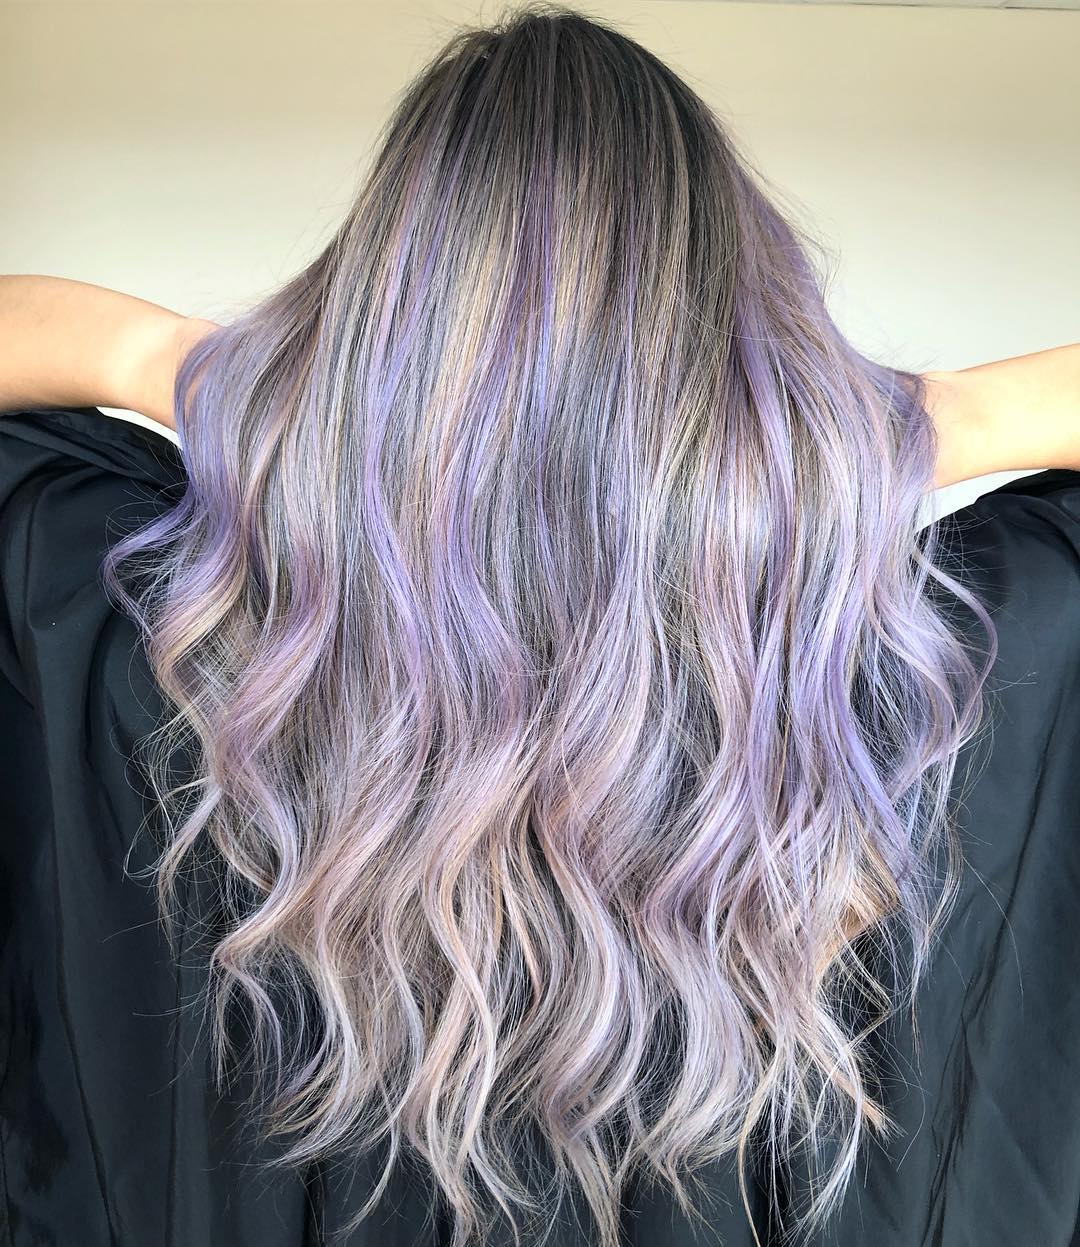 Blonde Hair with Light Purple Highlights